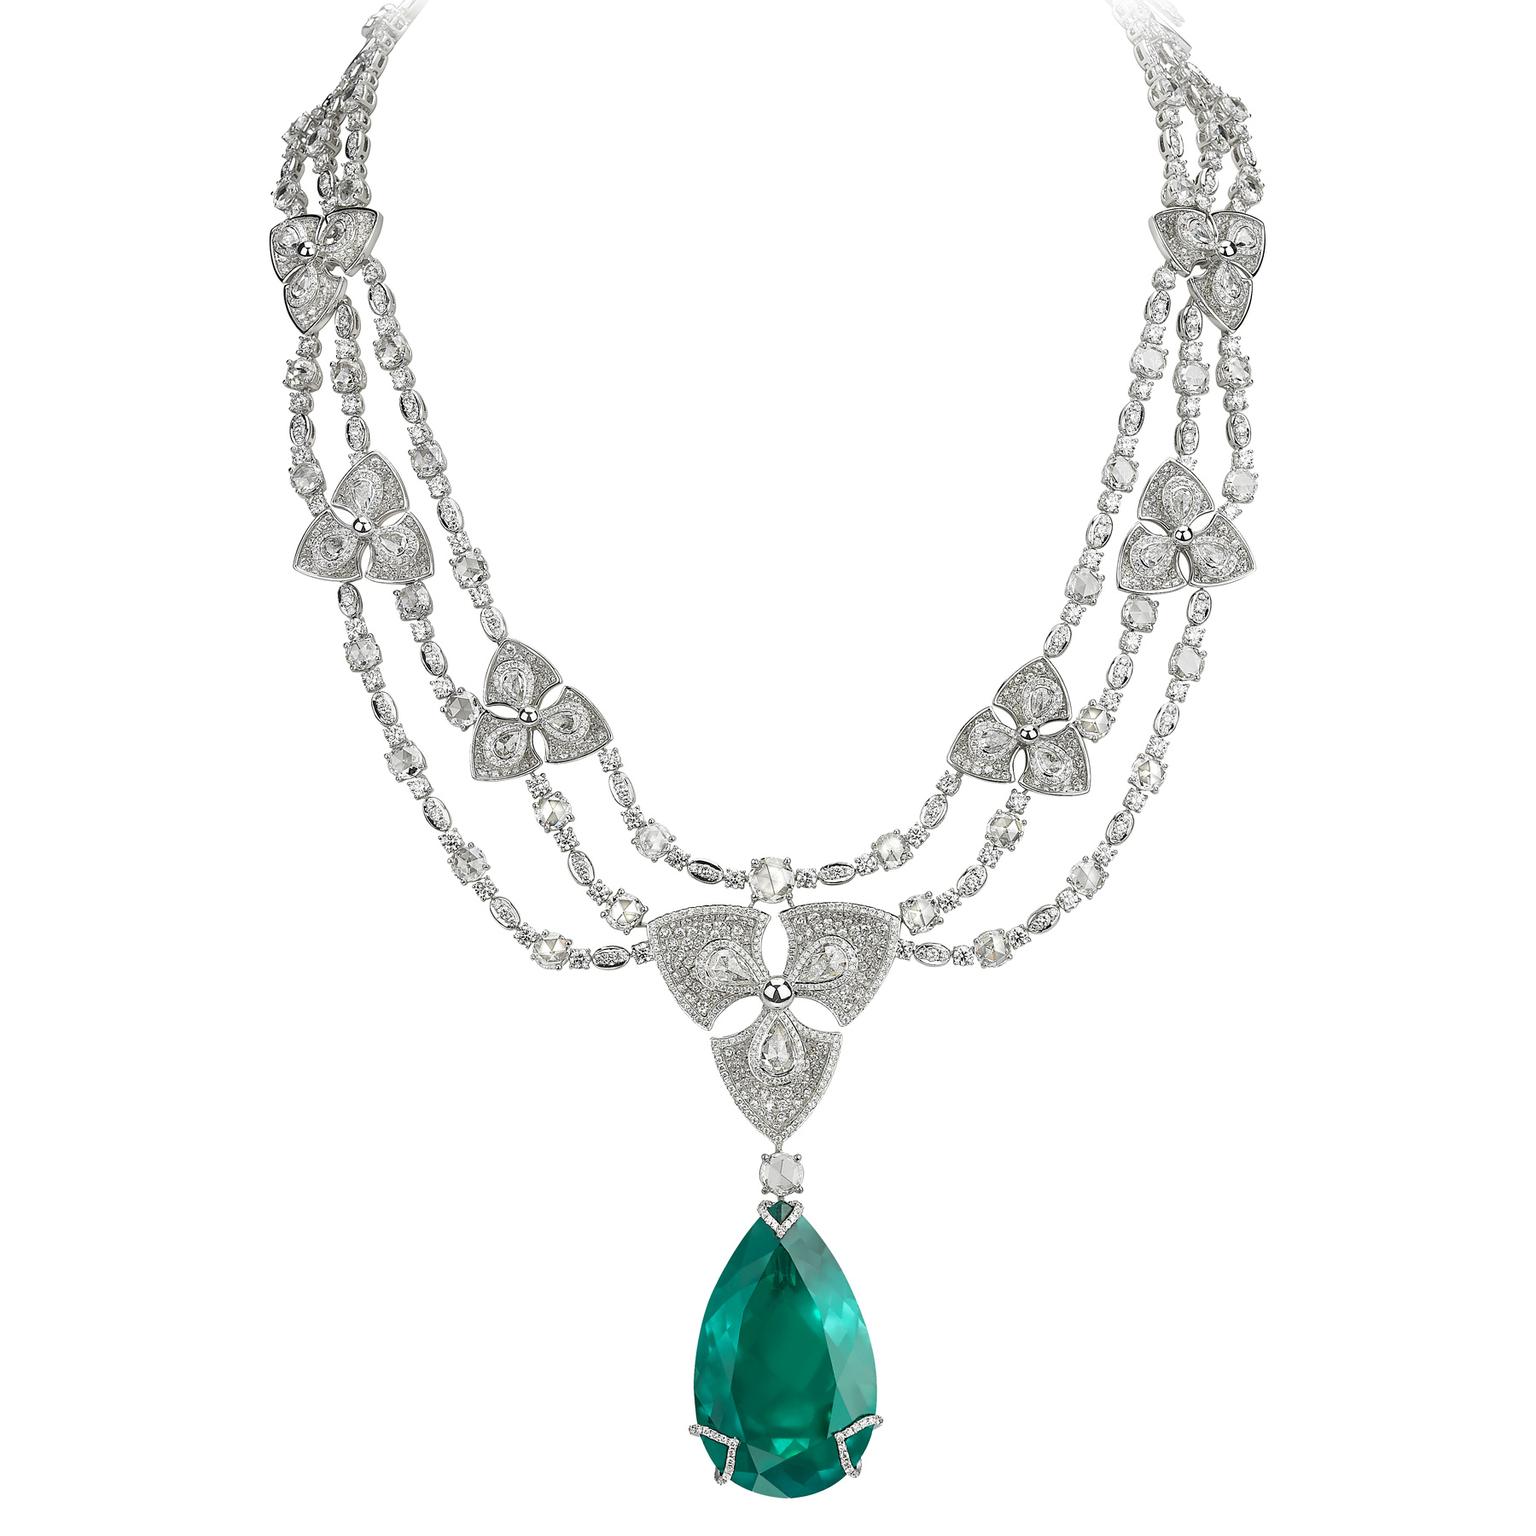 One-of-a-kind Avakian emerald necklace with spinning flower